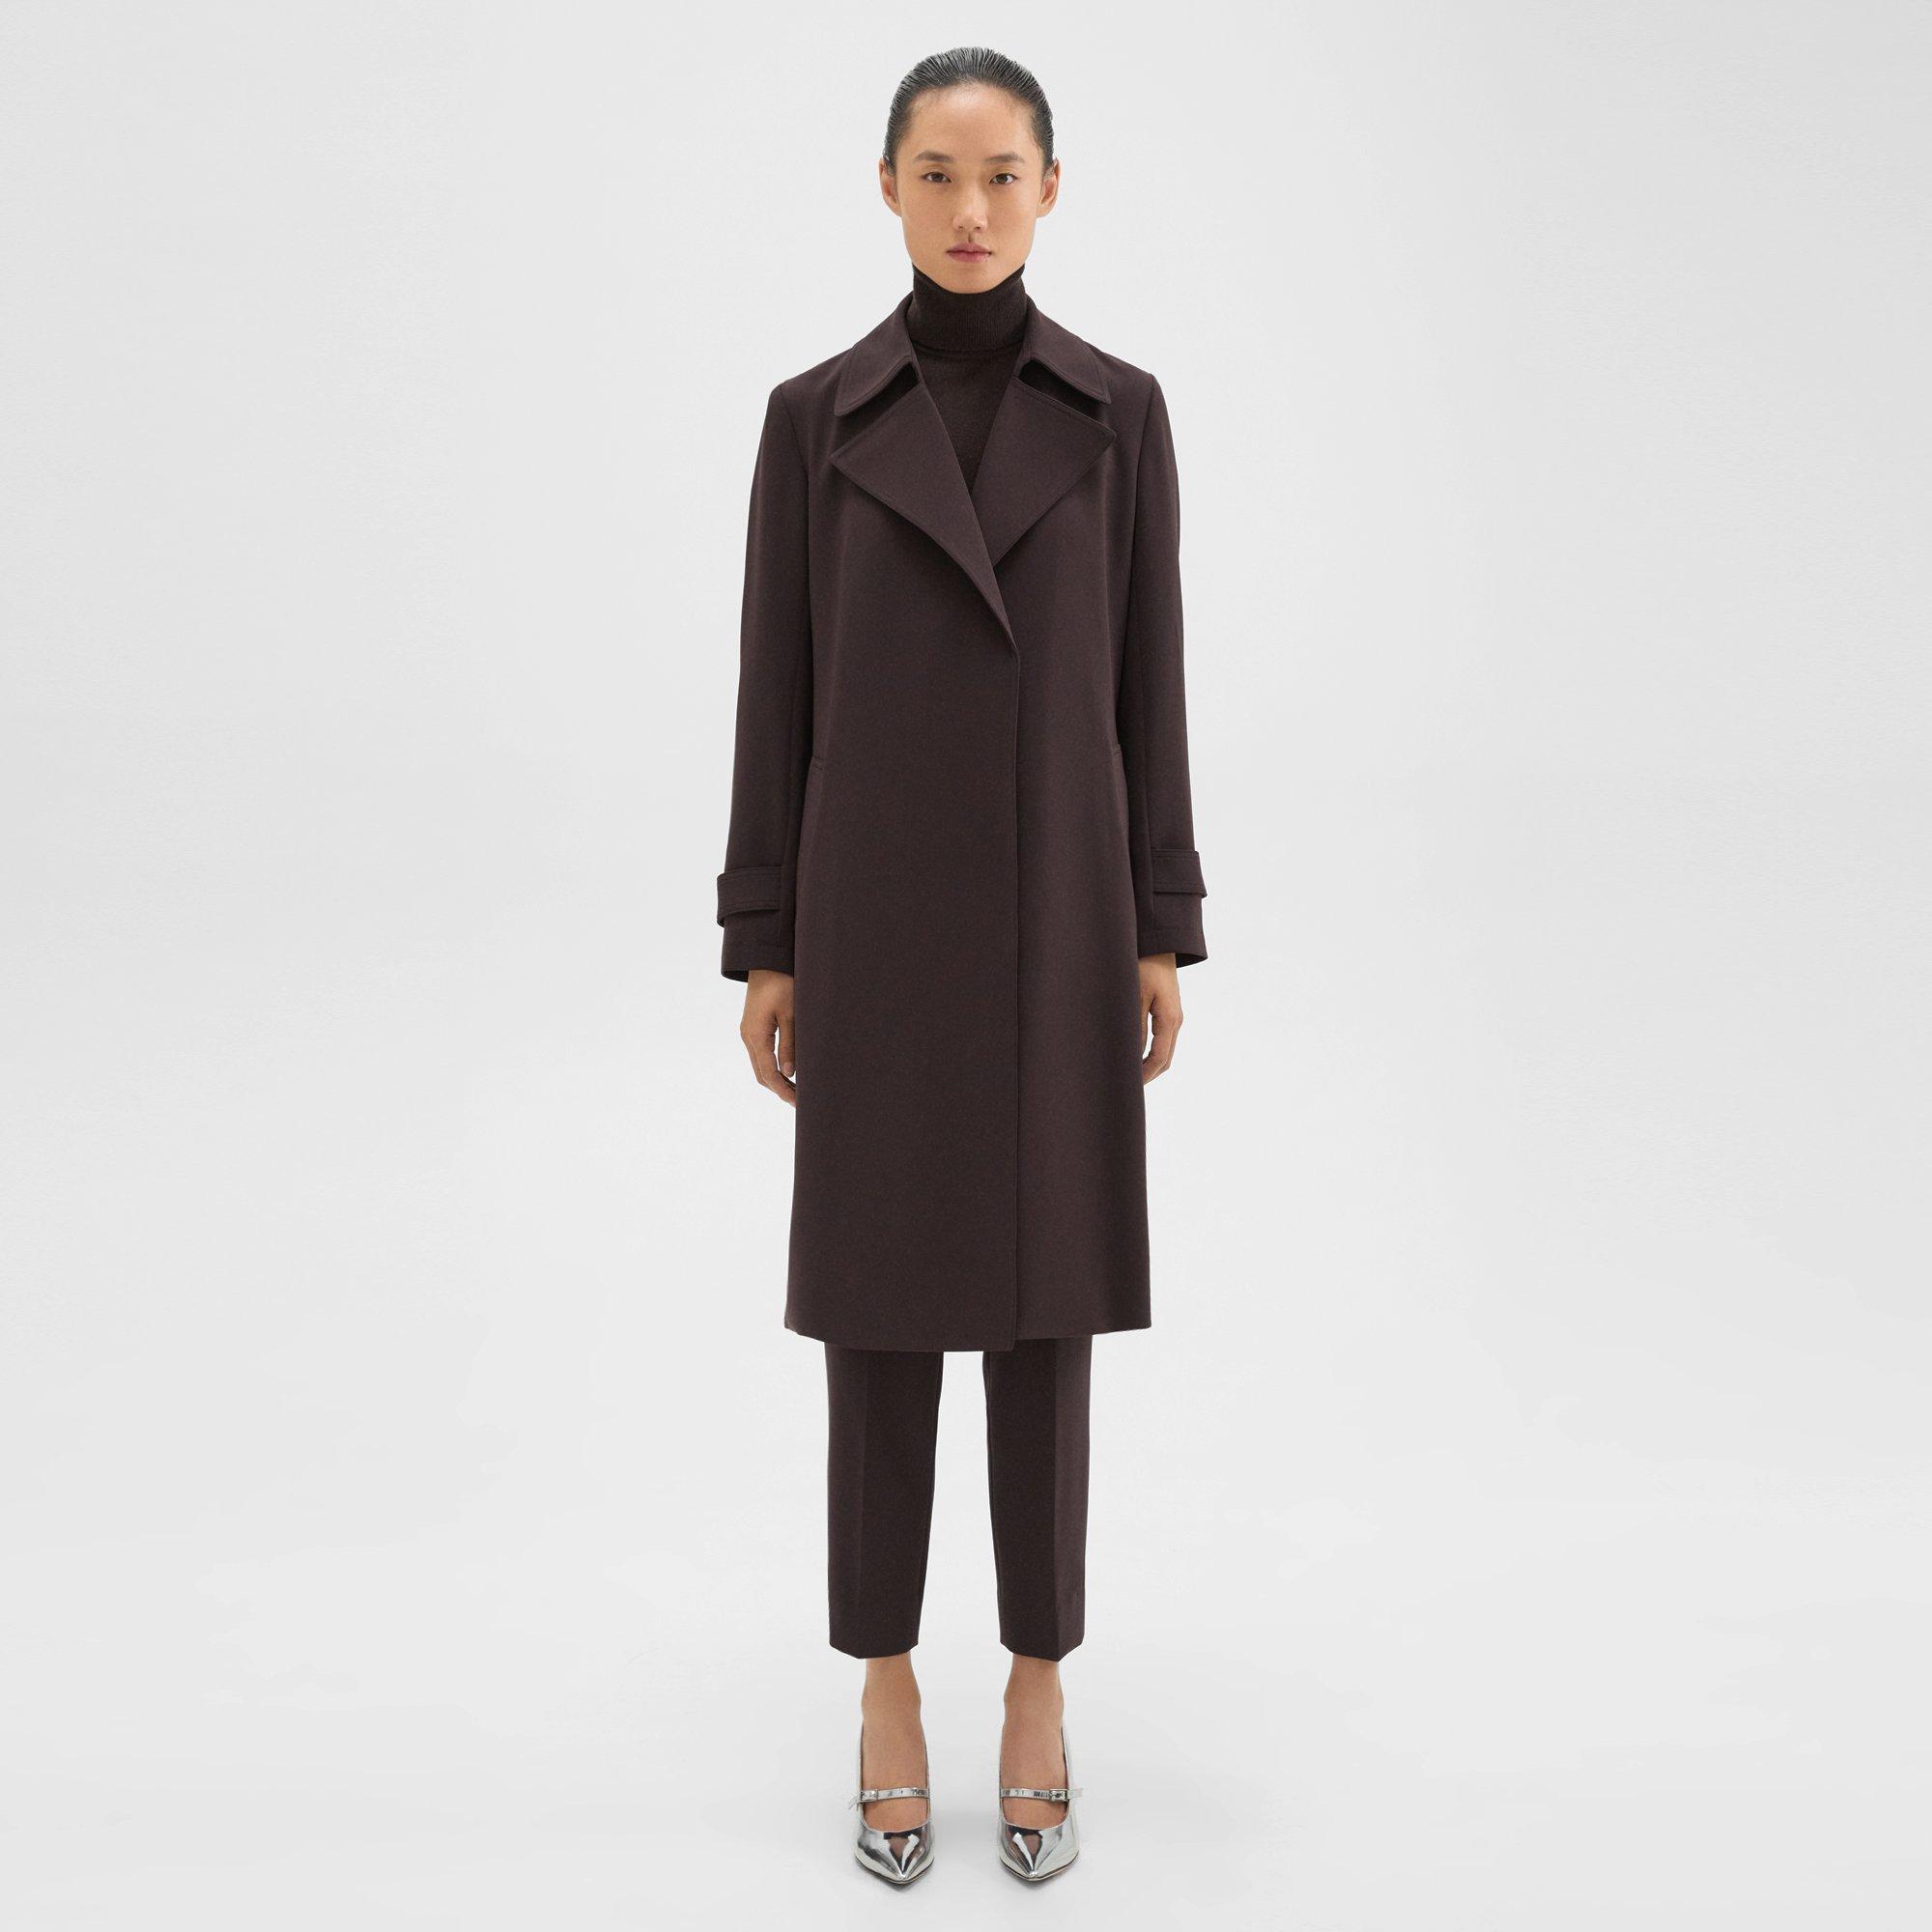 THEORY OAKLANE TRENCH COAT IN ADMIRAL CREPE